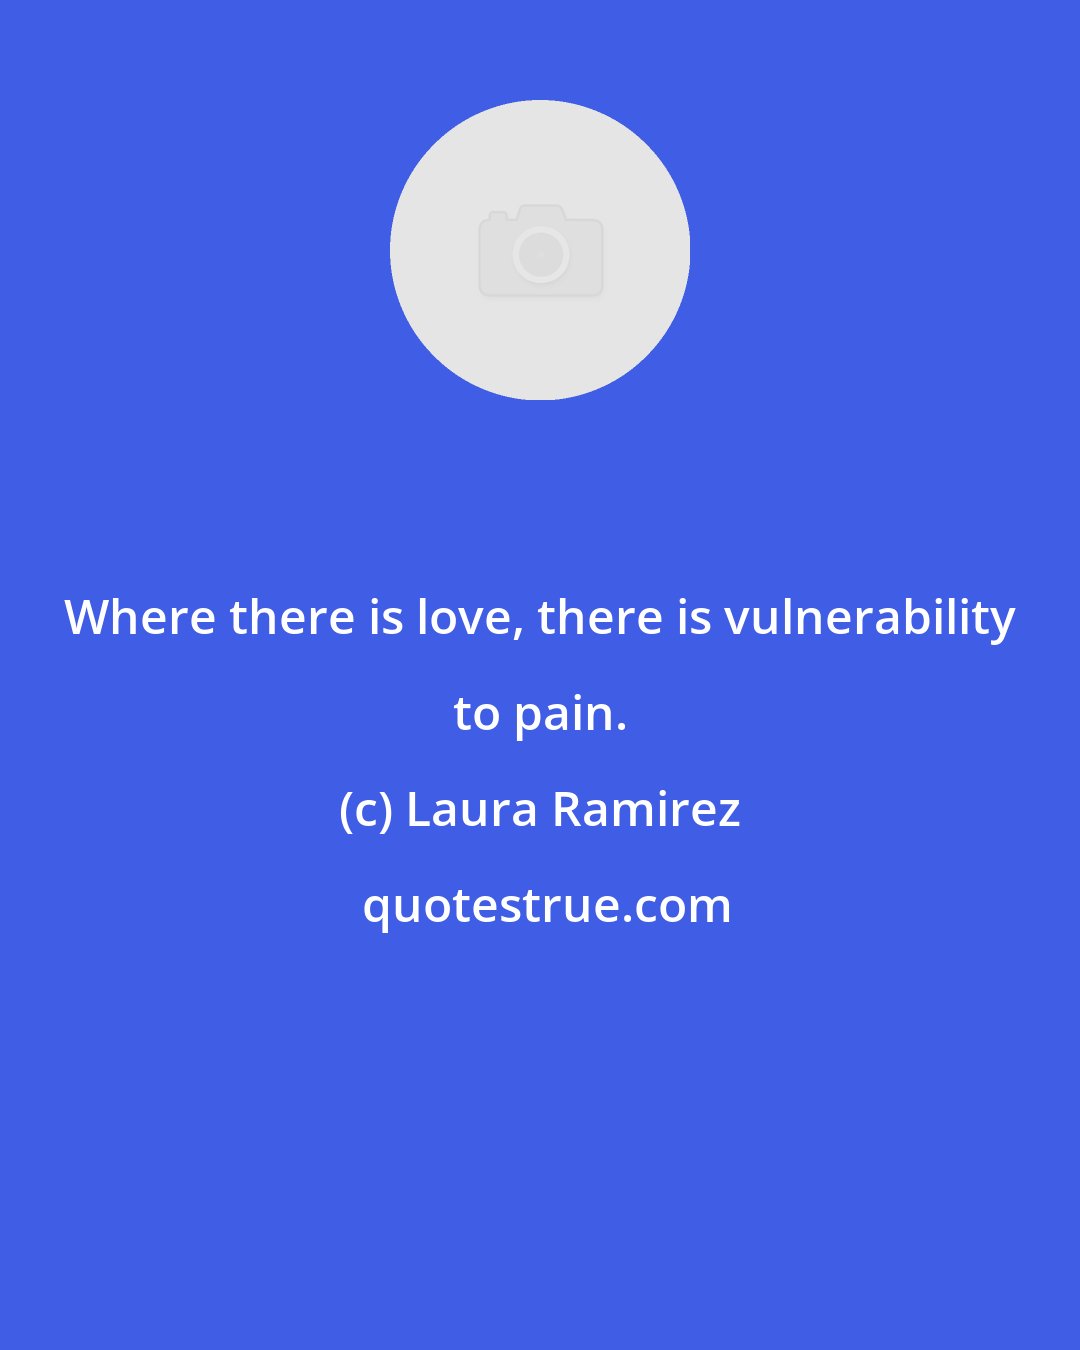 Laura Ramirez: Where there is love, there is vulnerability to pain.